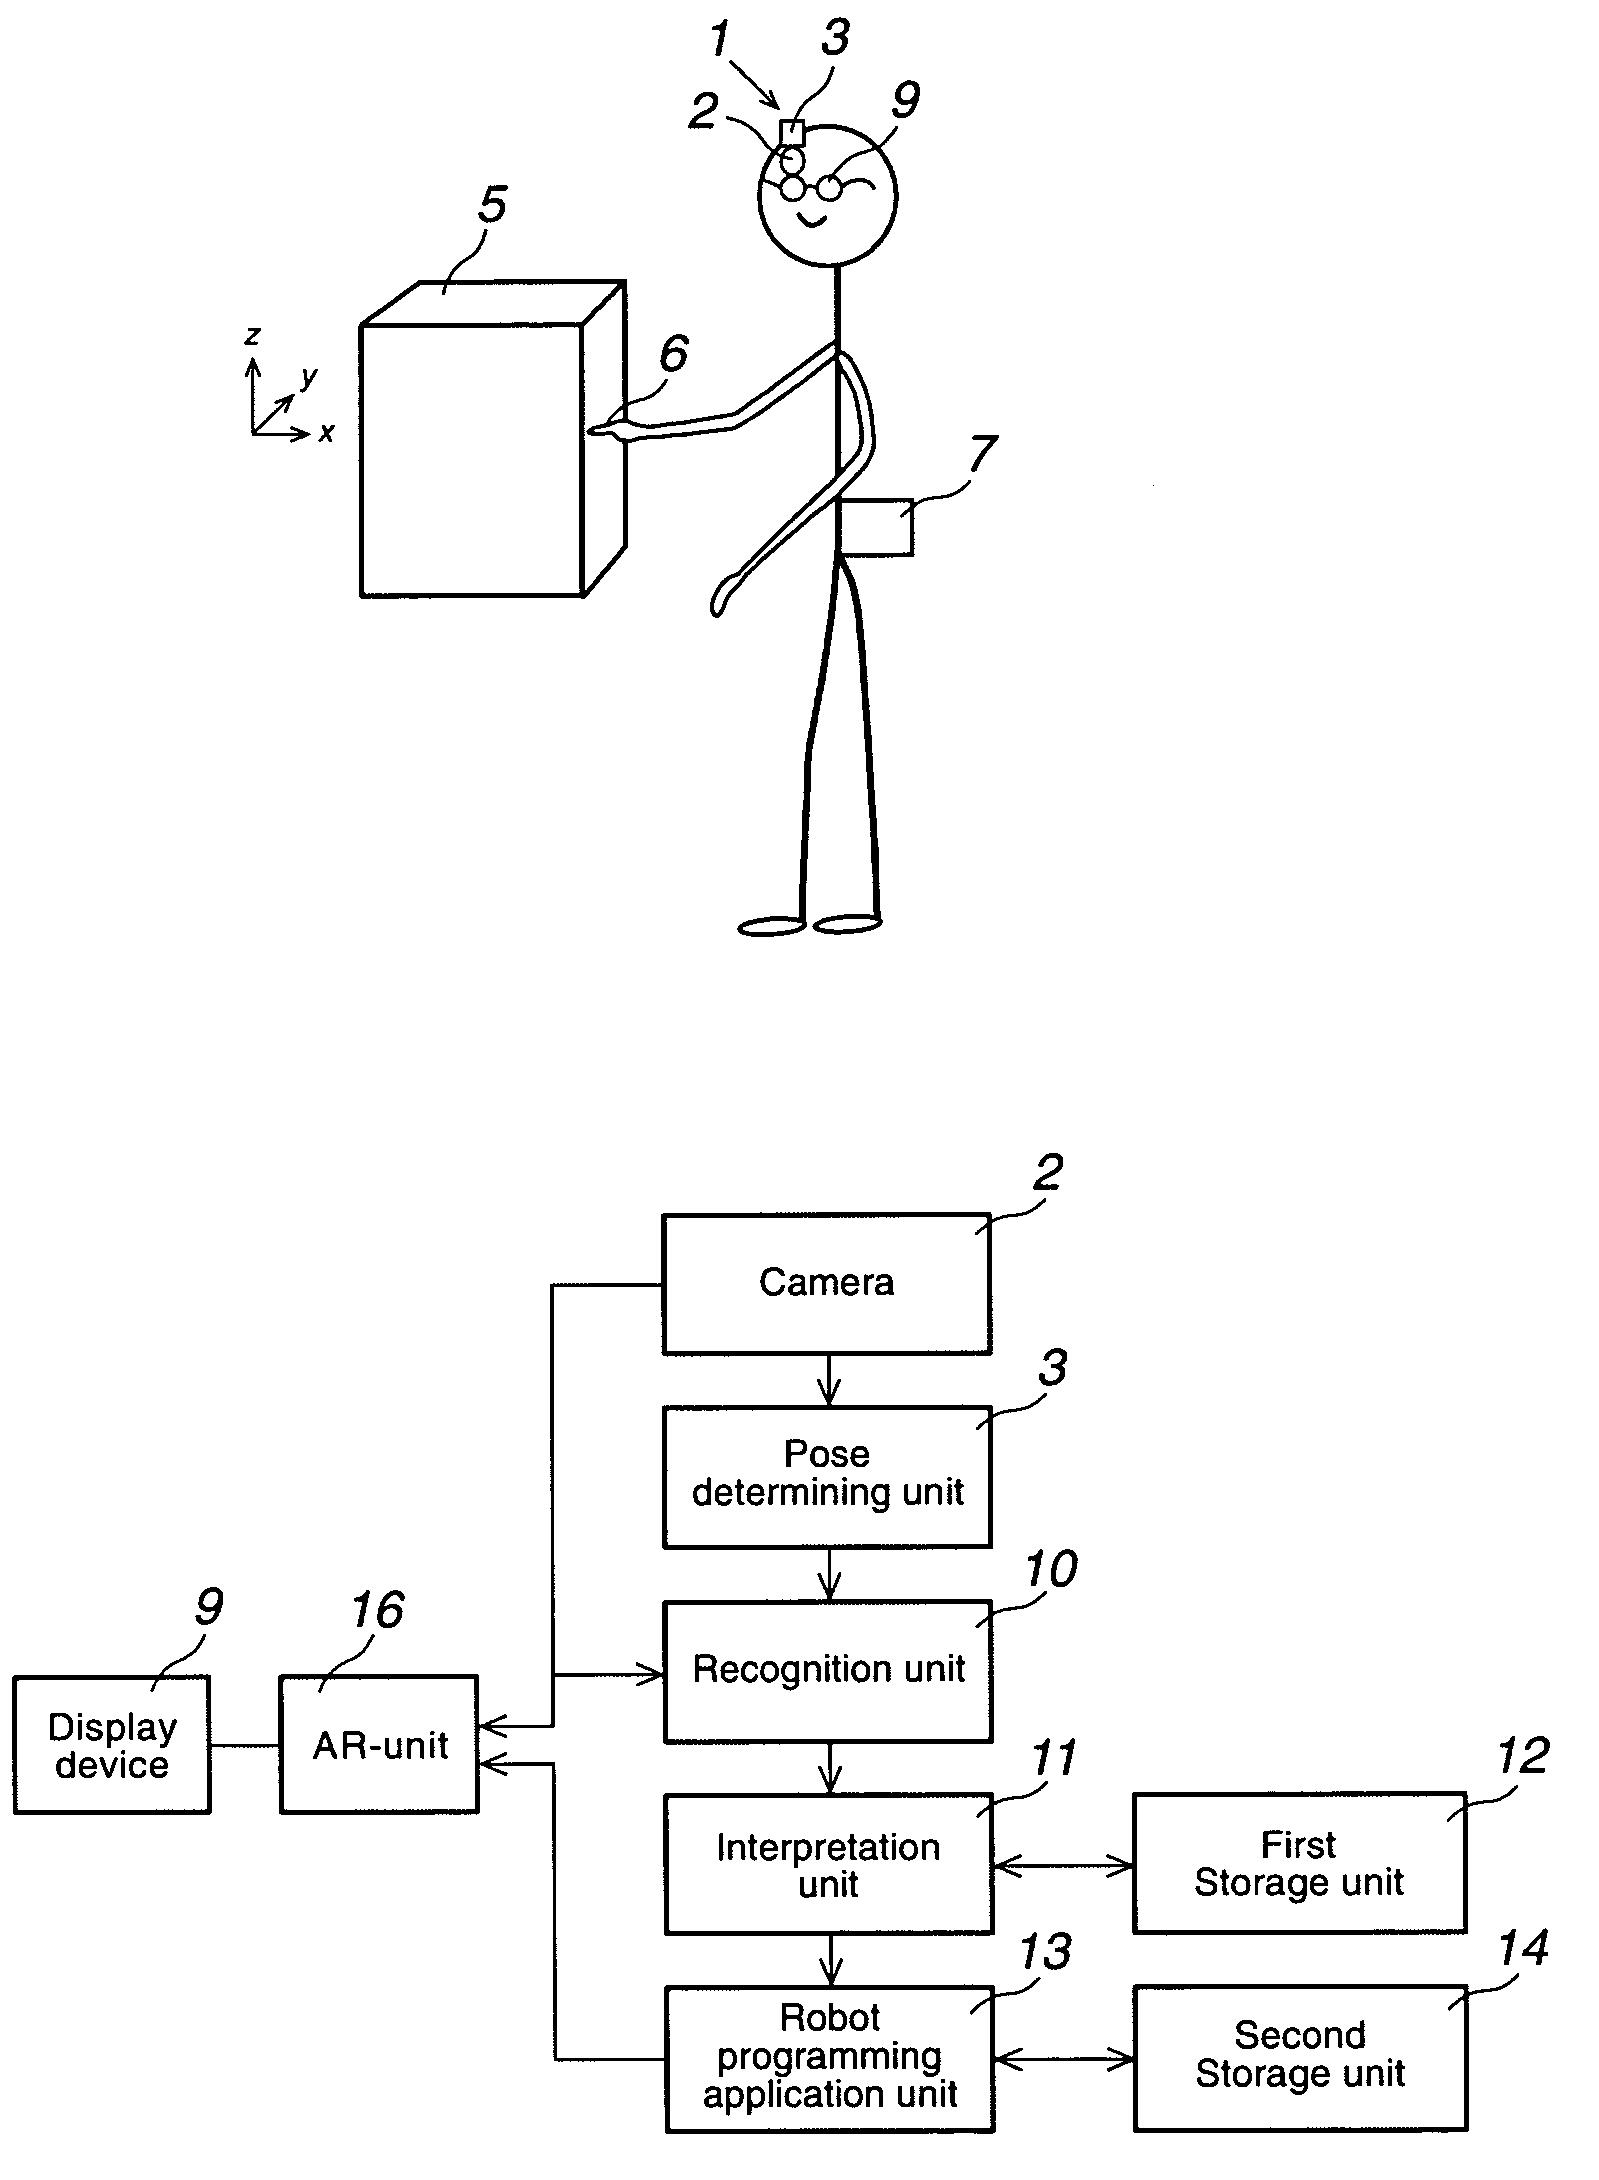 Method and a system for programming an industrial robot